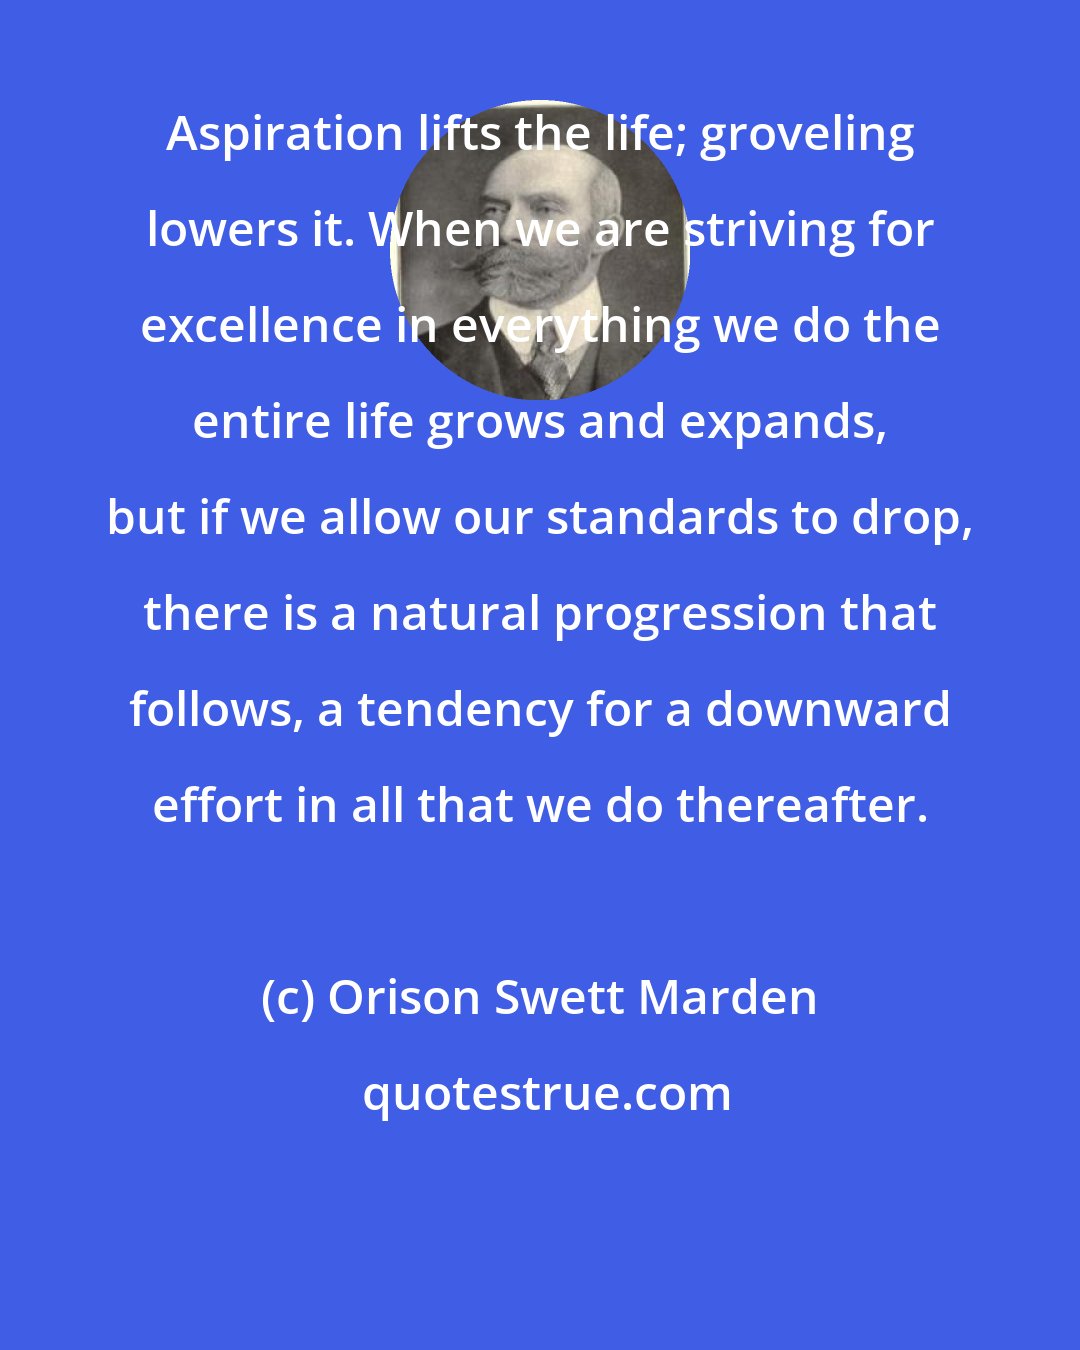 Orison Swett Marden: Aspiration lifts the life; groveling lowers it. When we are striving for excellence in everything we do the entire life grows and expands, but if we allow our standards to drop, there is a natural progression that follows, a tendency for a downward effort in all that we do thereafter.